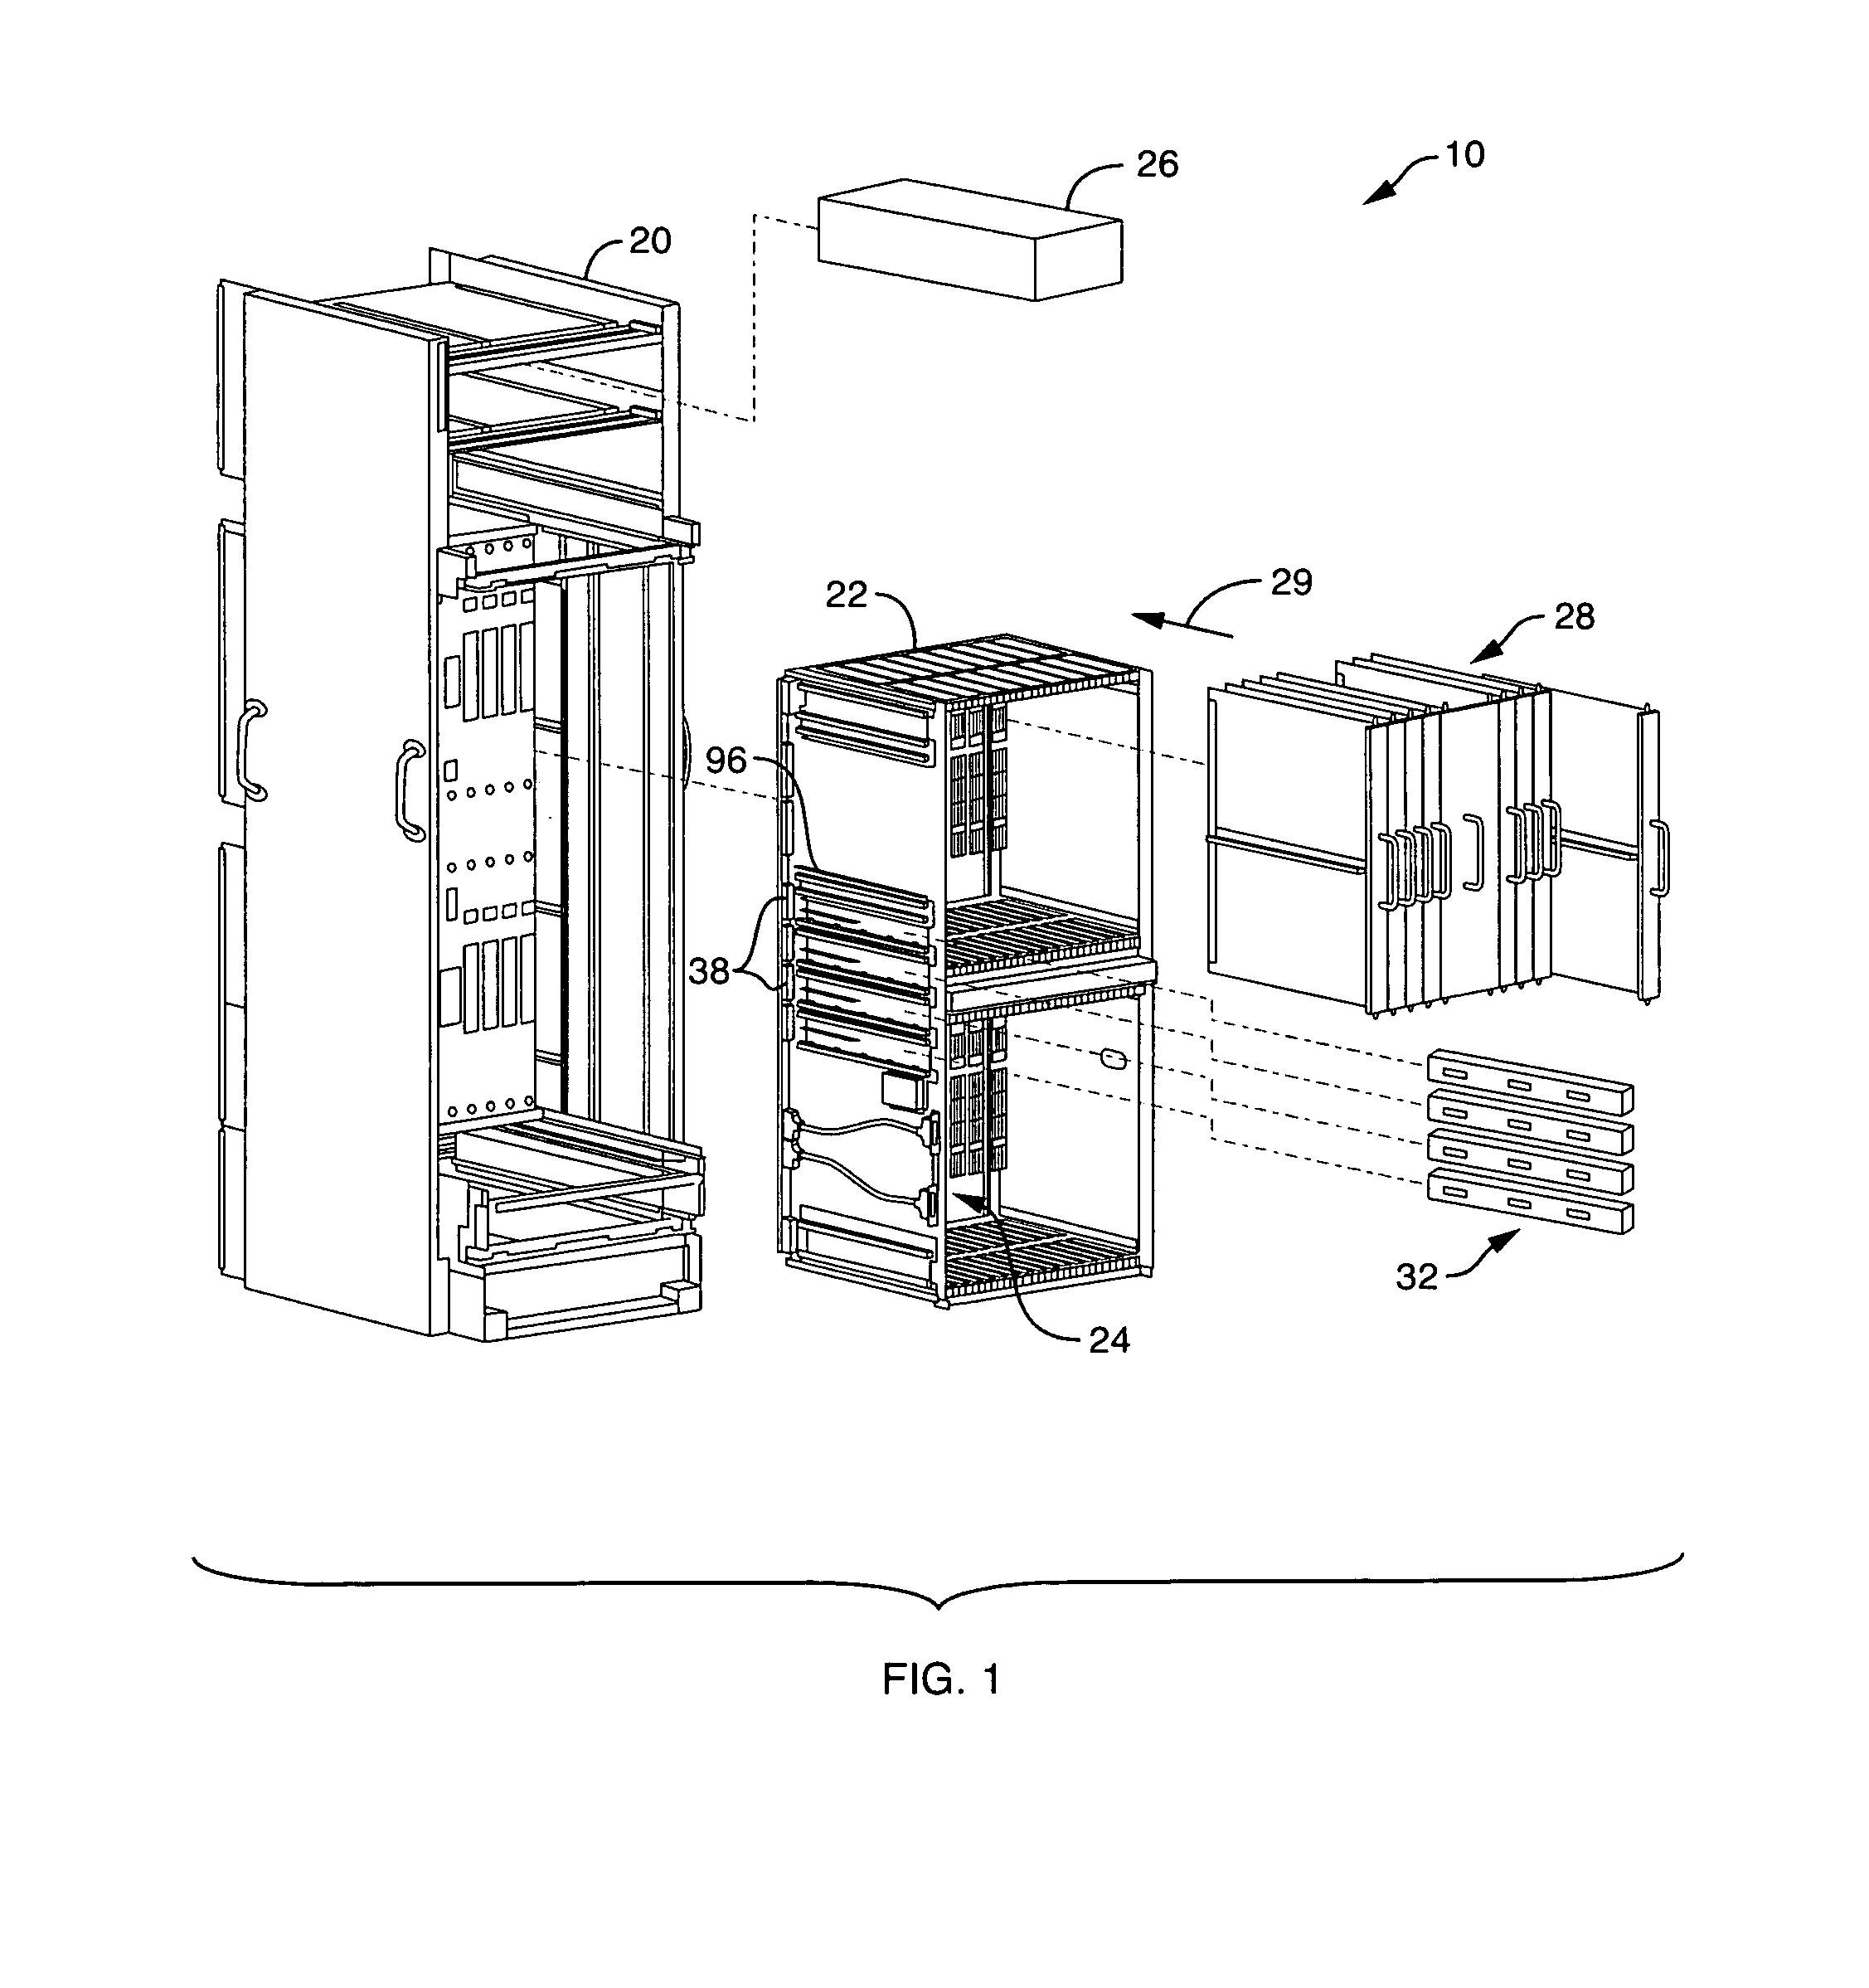 Methods and apparatus for distributing power in a computerized device